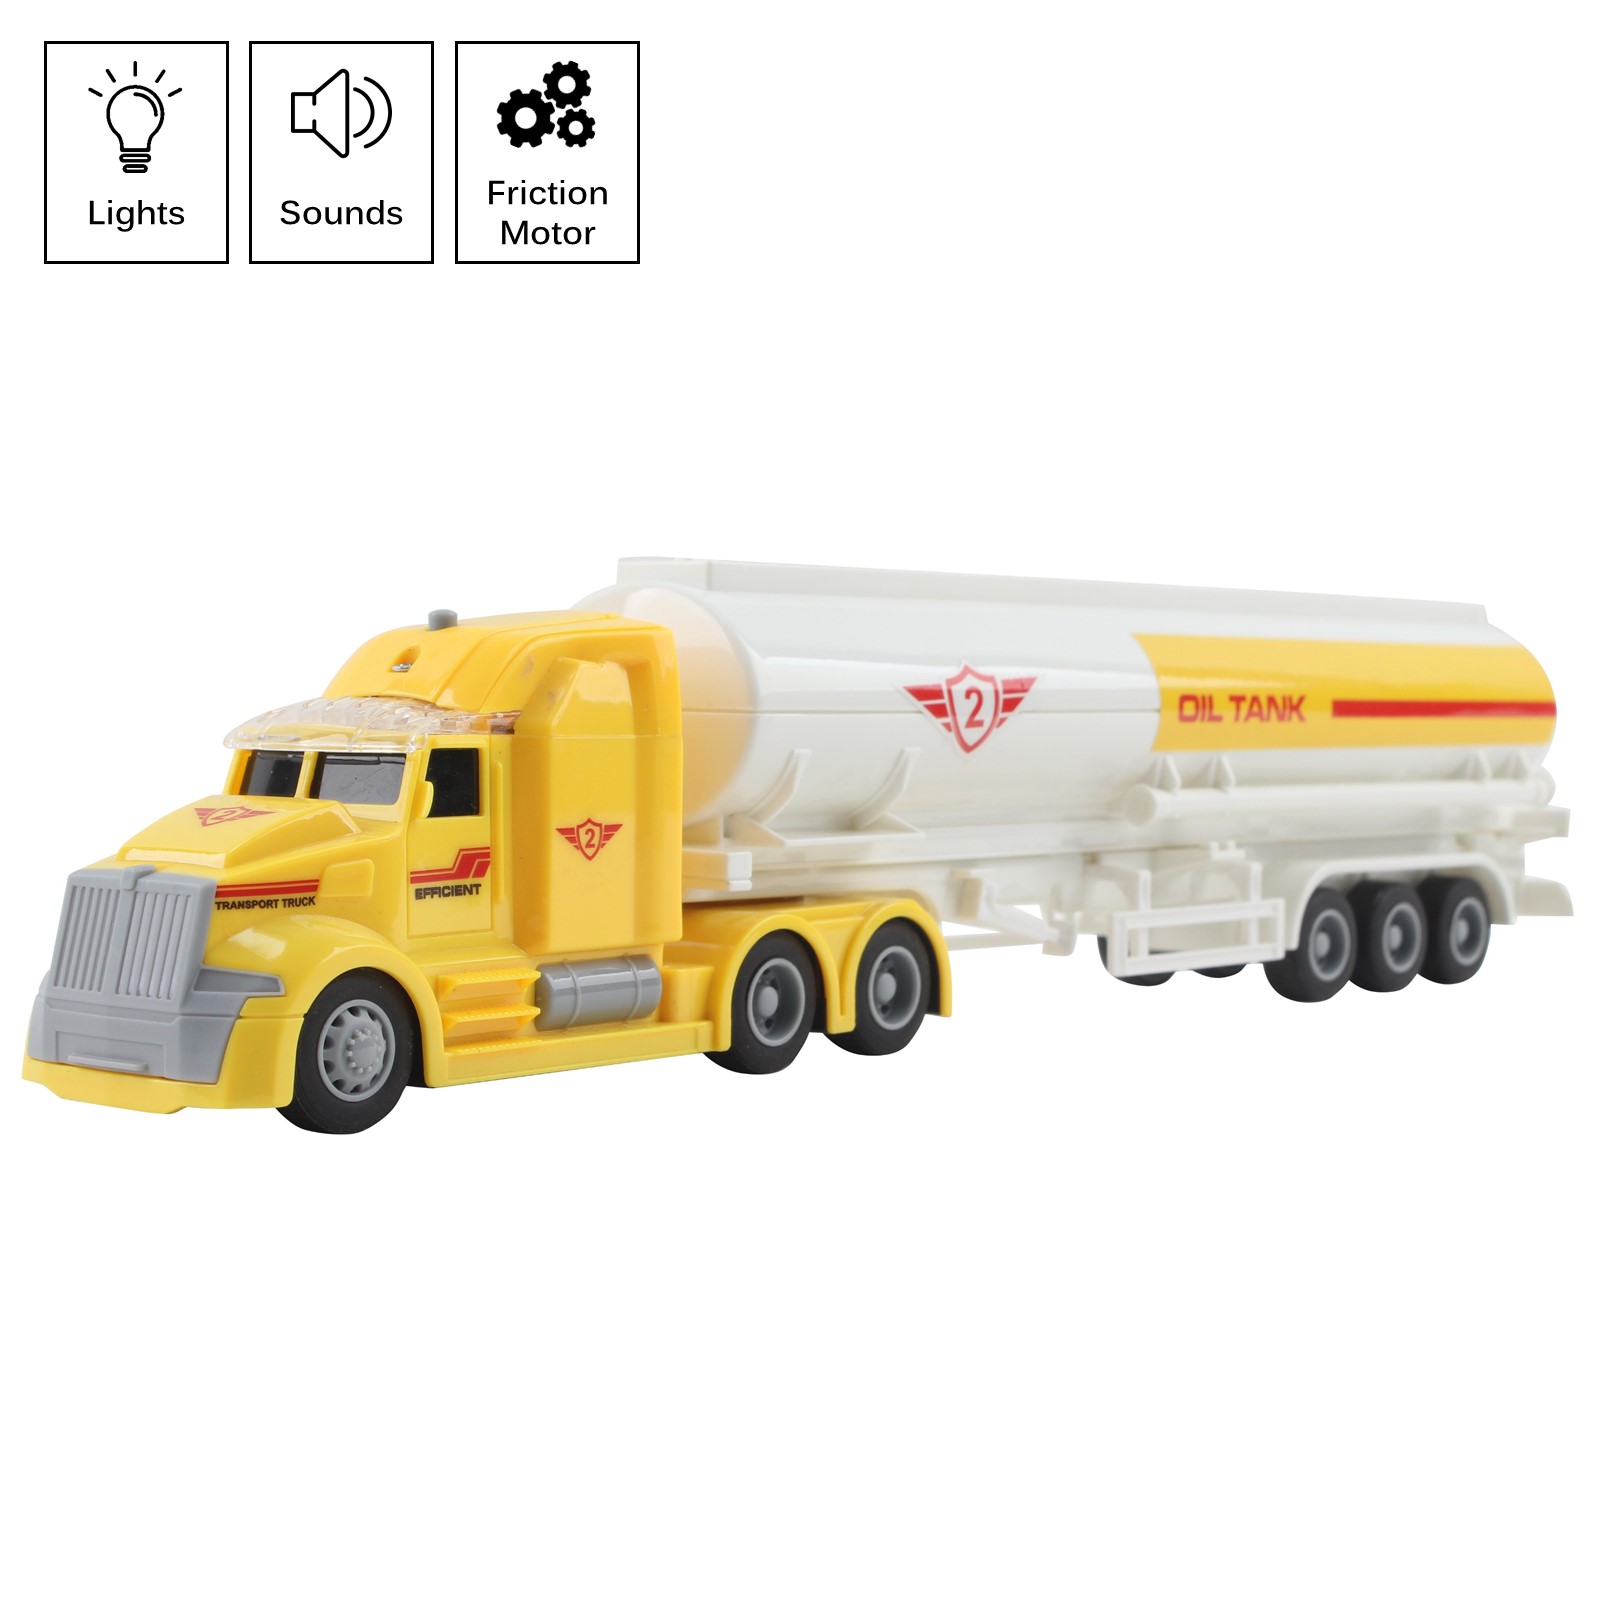 Toy Semi Truck Fuel Trailer 14.5\" Friction Powered With Lights And Sound Kids Push And Go Big Rig Oil Carrier Vehicle Transporter Semi-Truck Pretend Play Car Great Gift For Children Boys Girls